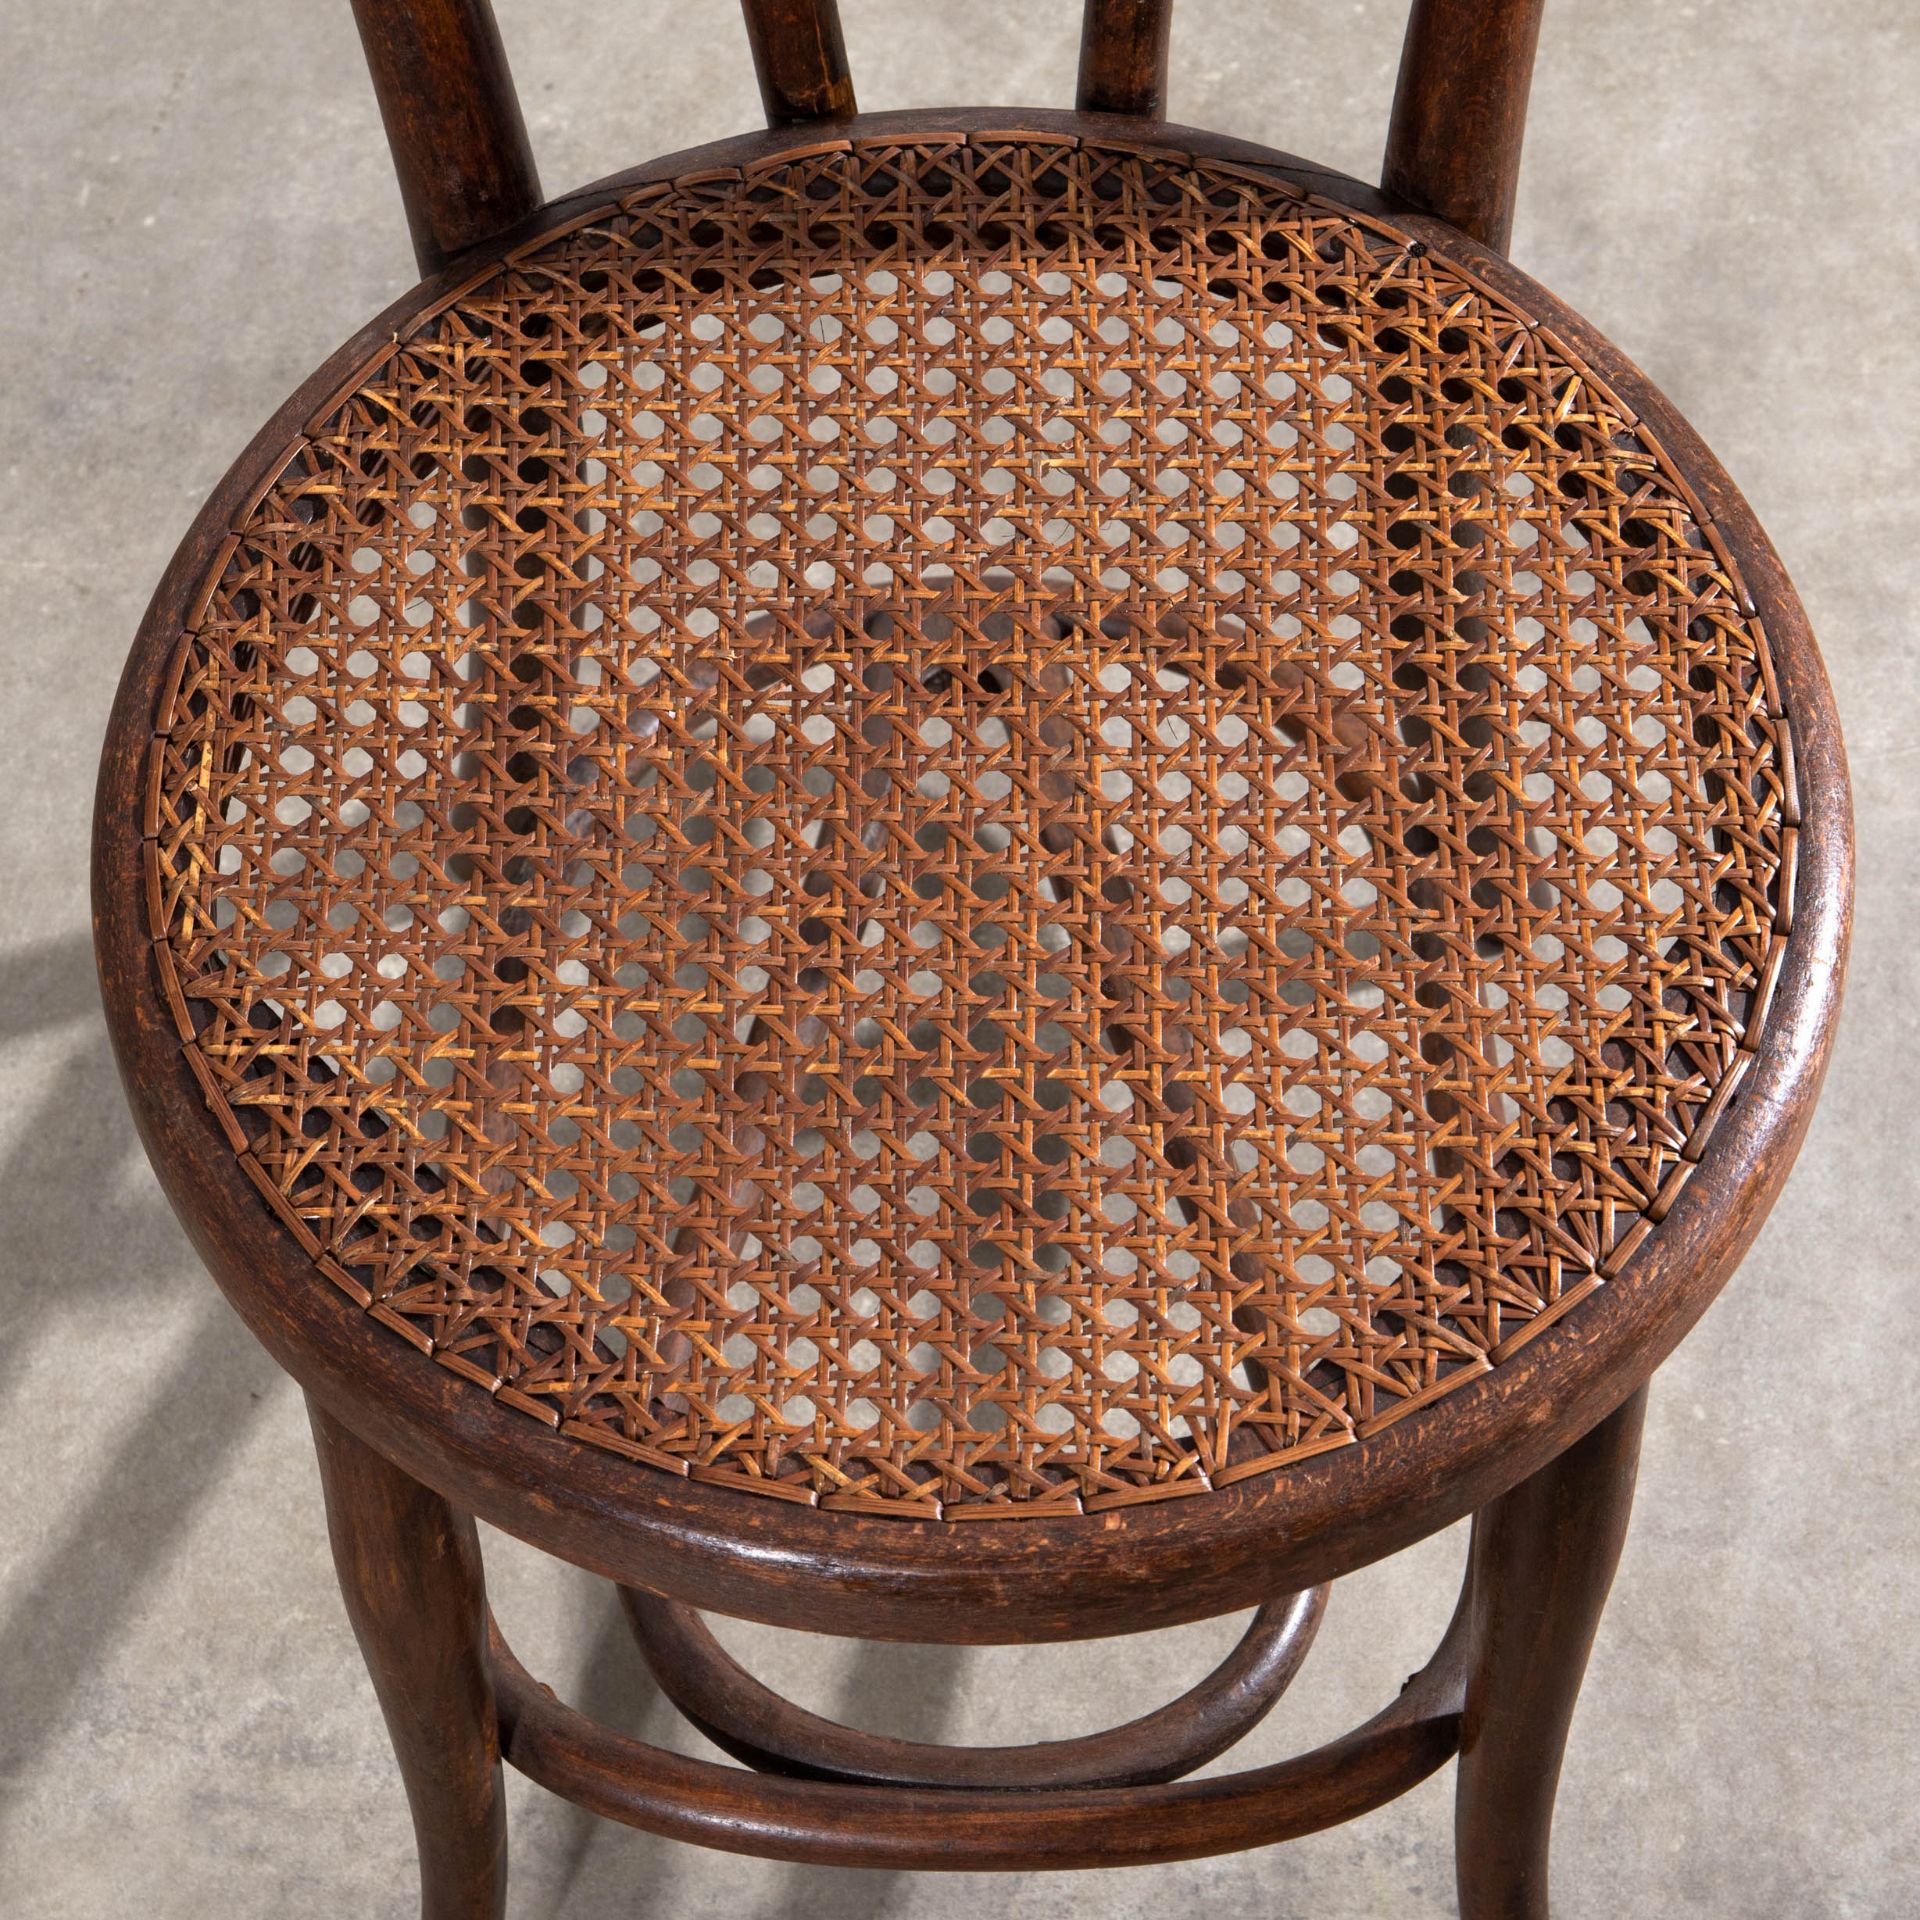 Thonet chair no. 18 with boot jack - Image 2 of 8